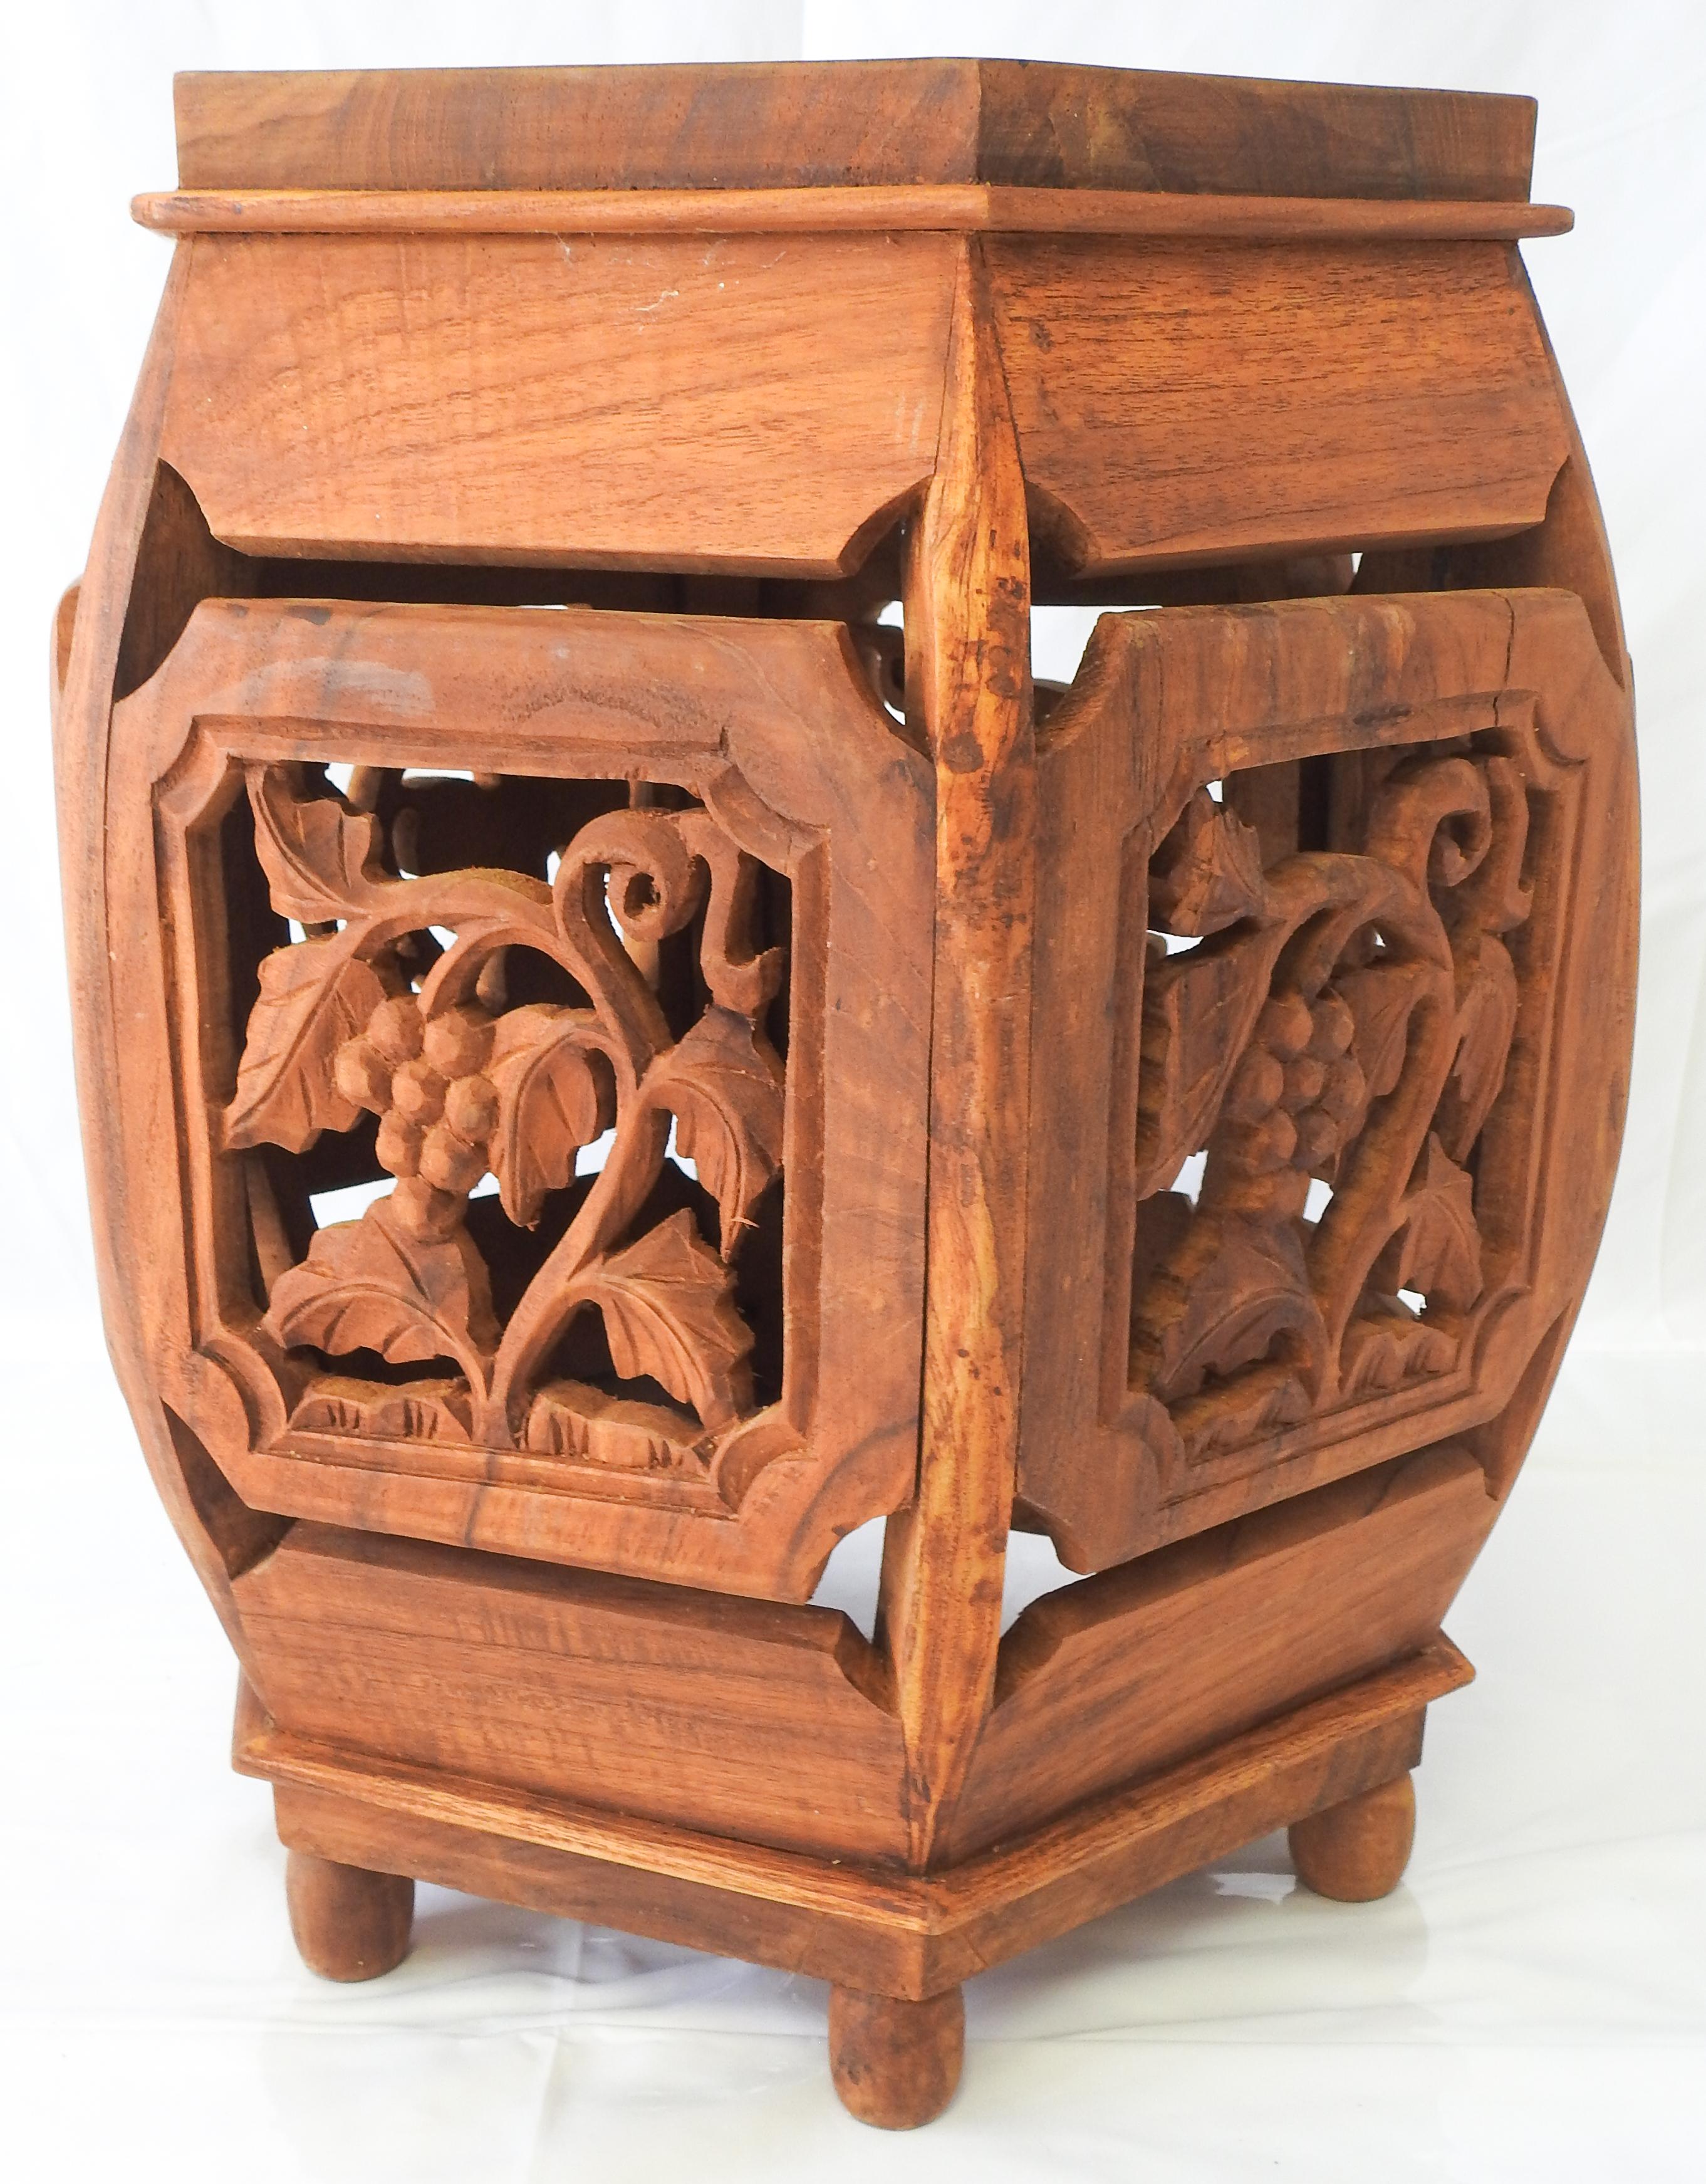 hand carved teak side table. Carved with panels of foliate and grape motif. The table sits on a ball foot and are in a hexagonal shape. All the trim is good shape.